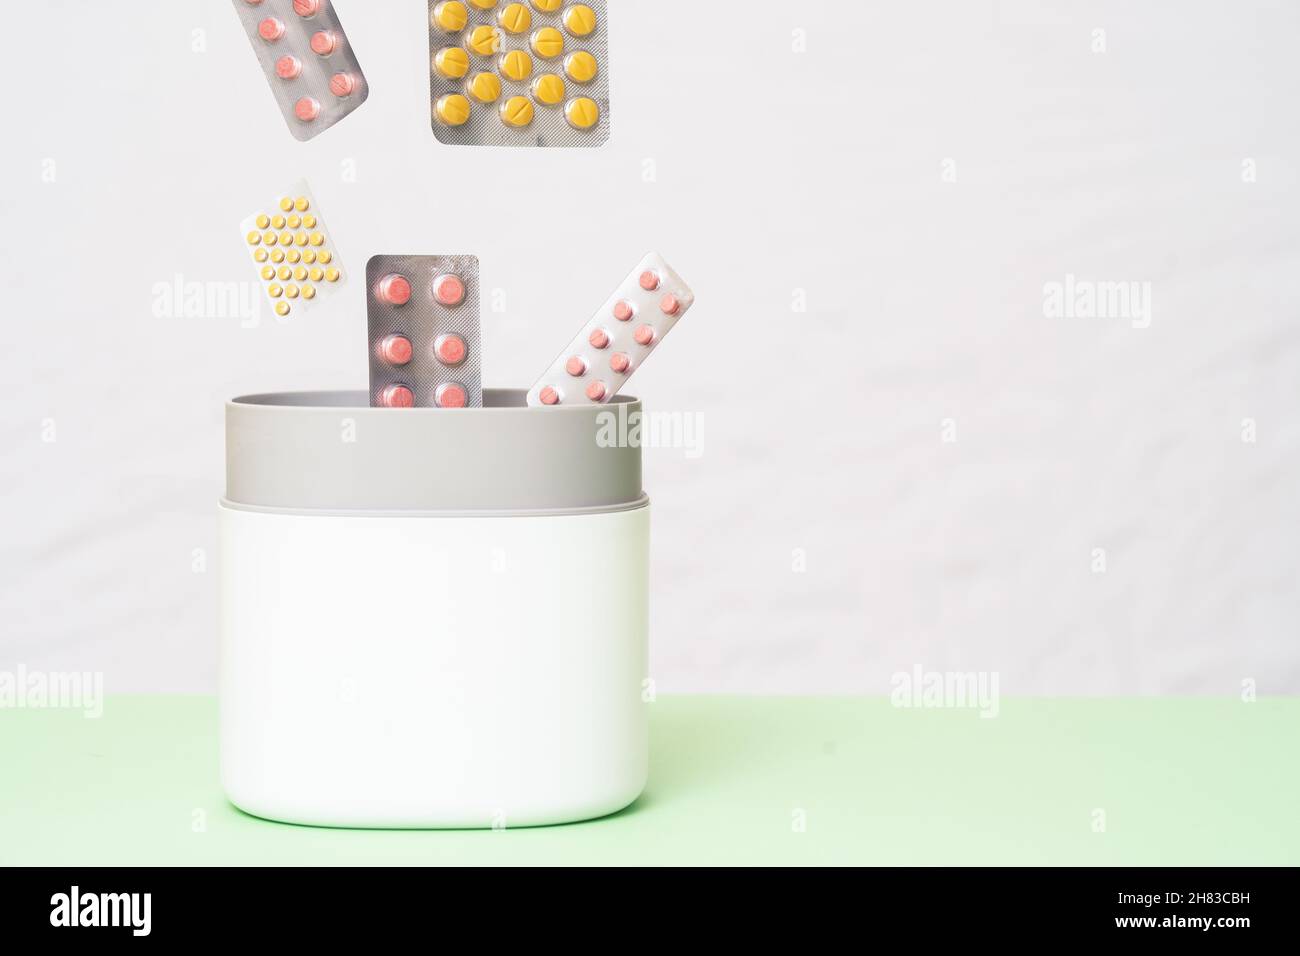 Close up photo of trash bin with full of pills and medicines. Expired pills and medicines are being gathered to be recycled. Waste management concept. Stock Photo